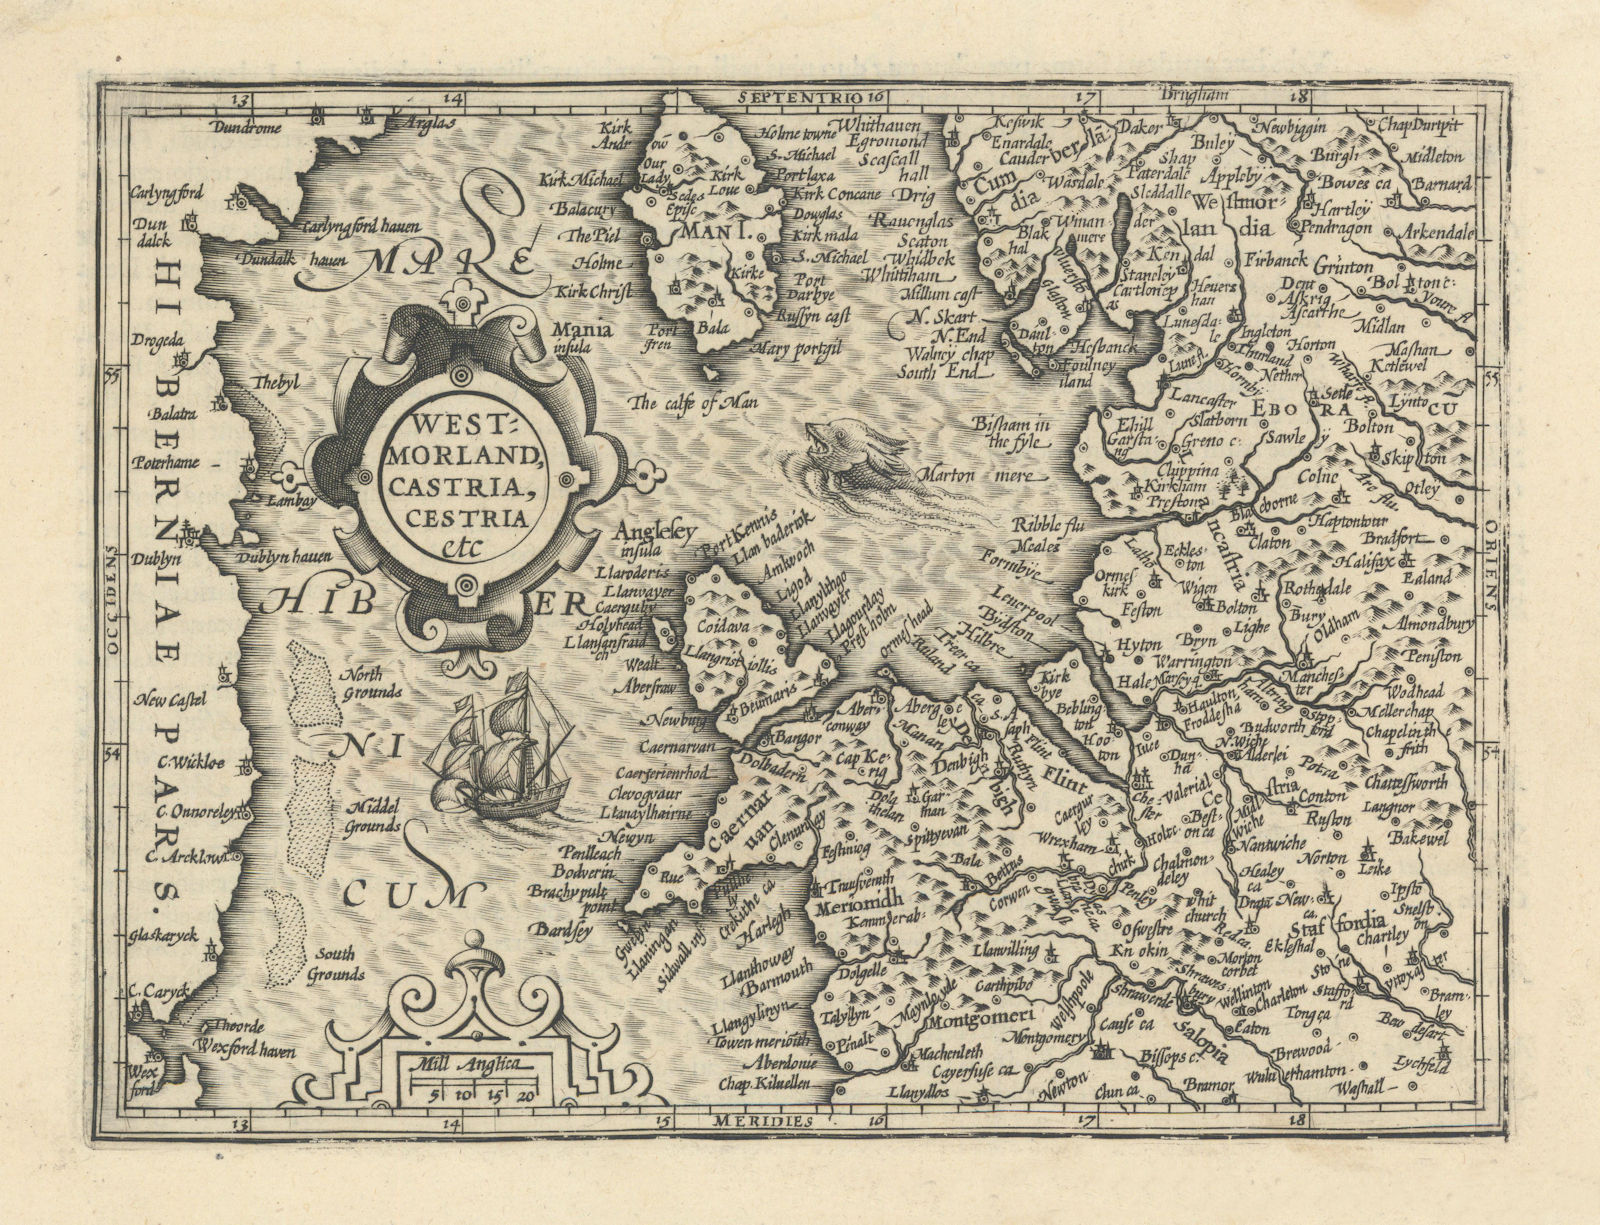 Associate Product Westmorland, Castria, Cestria by Mercator/Hondius. NW England & Wales 1610 map